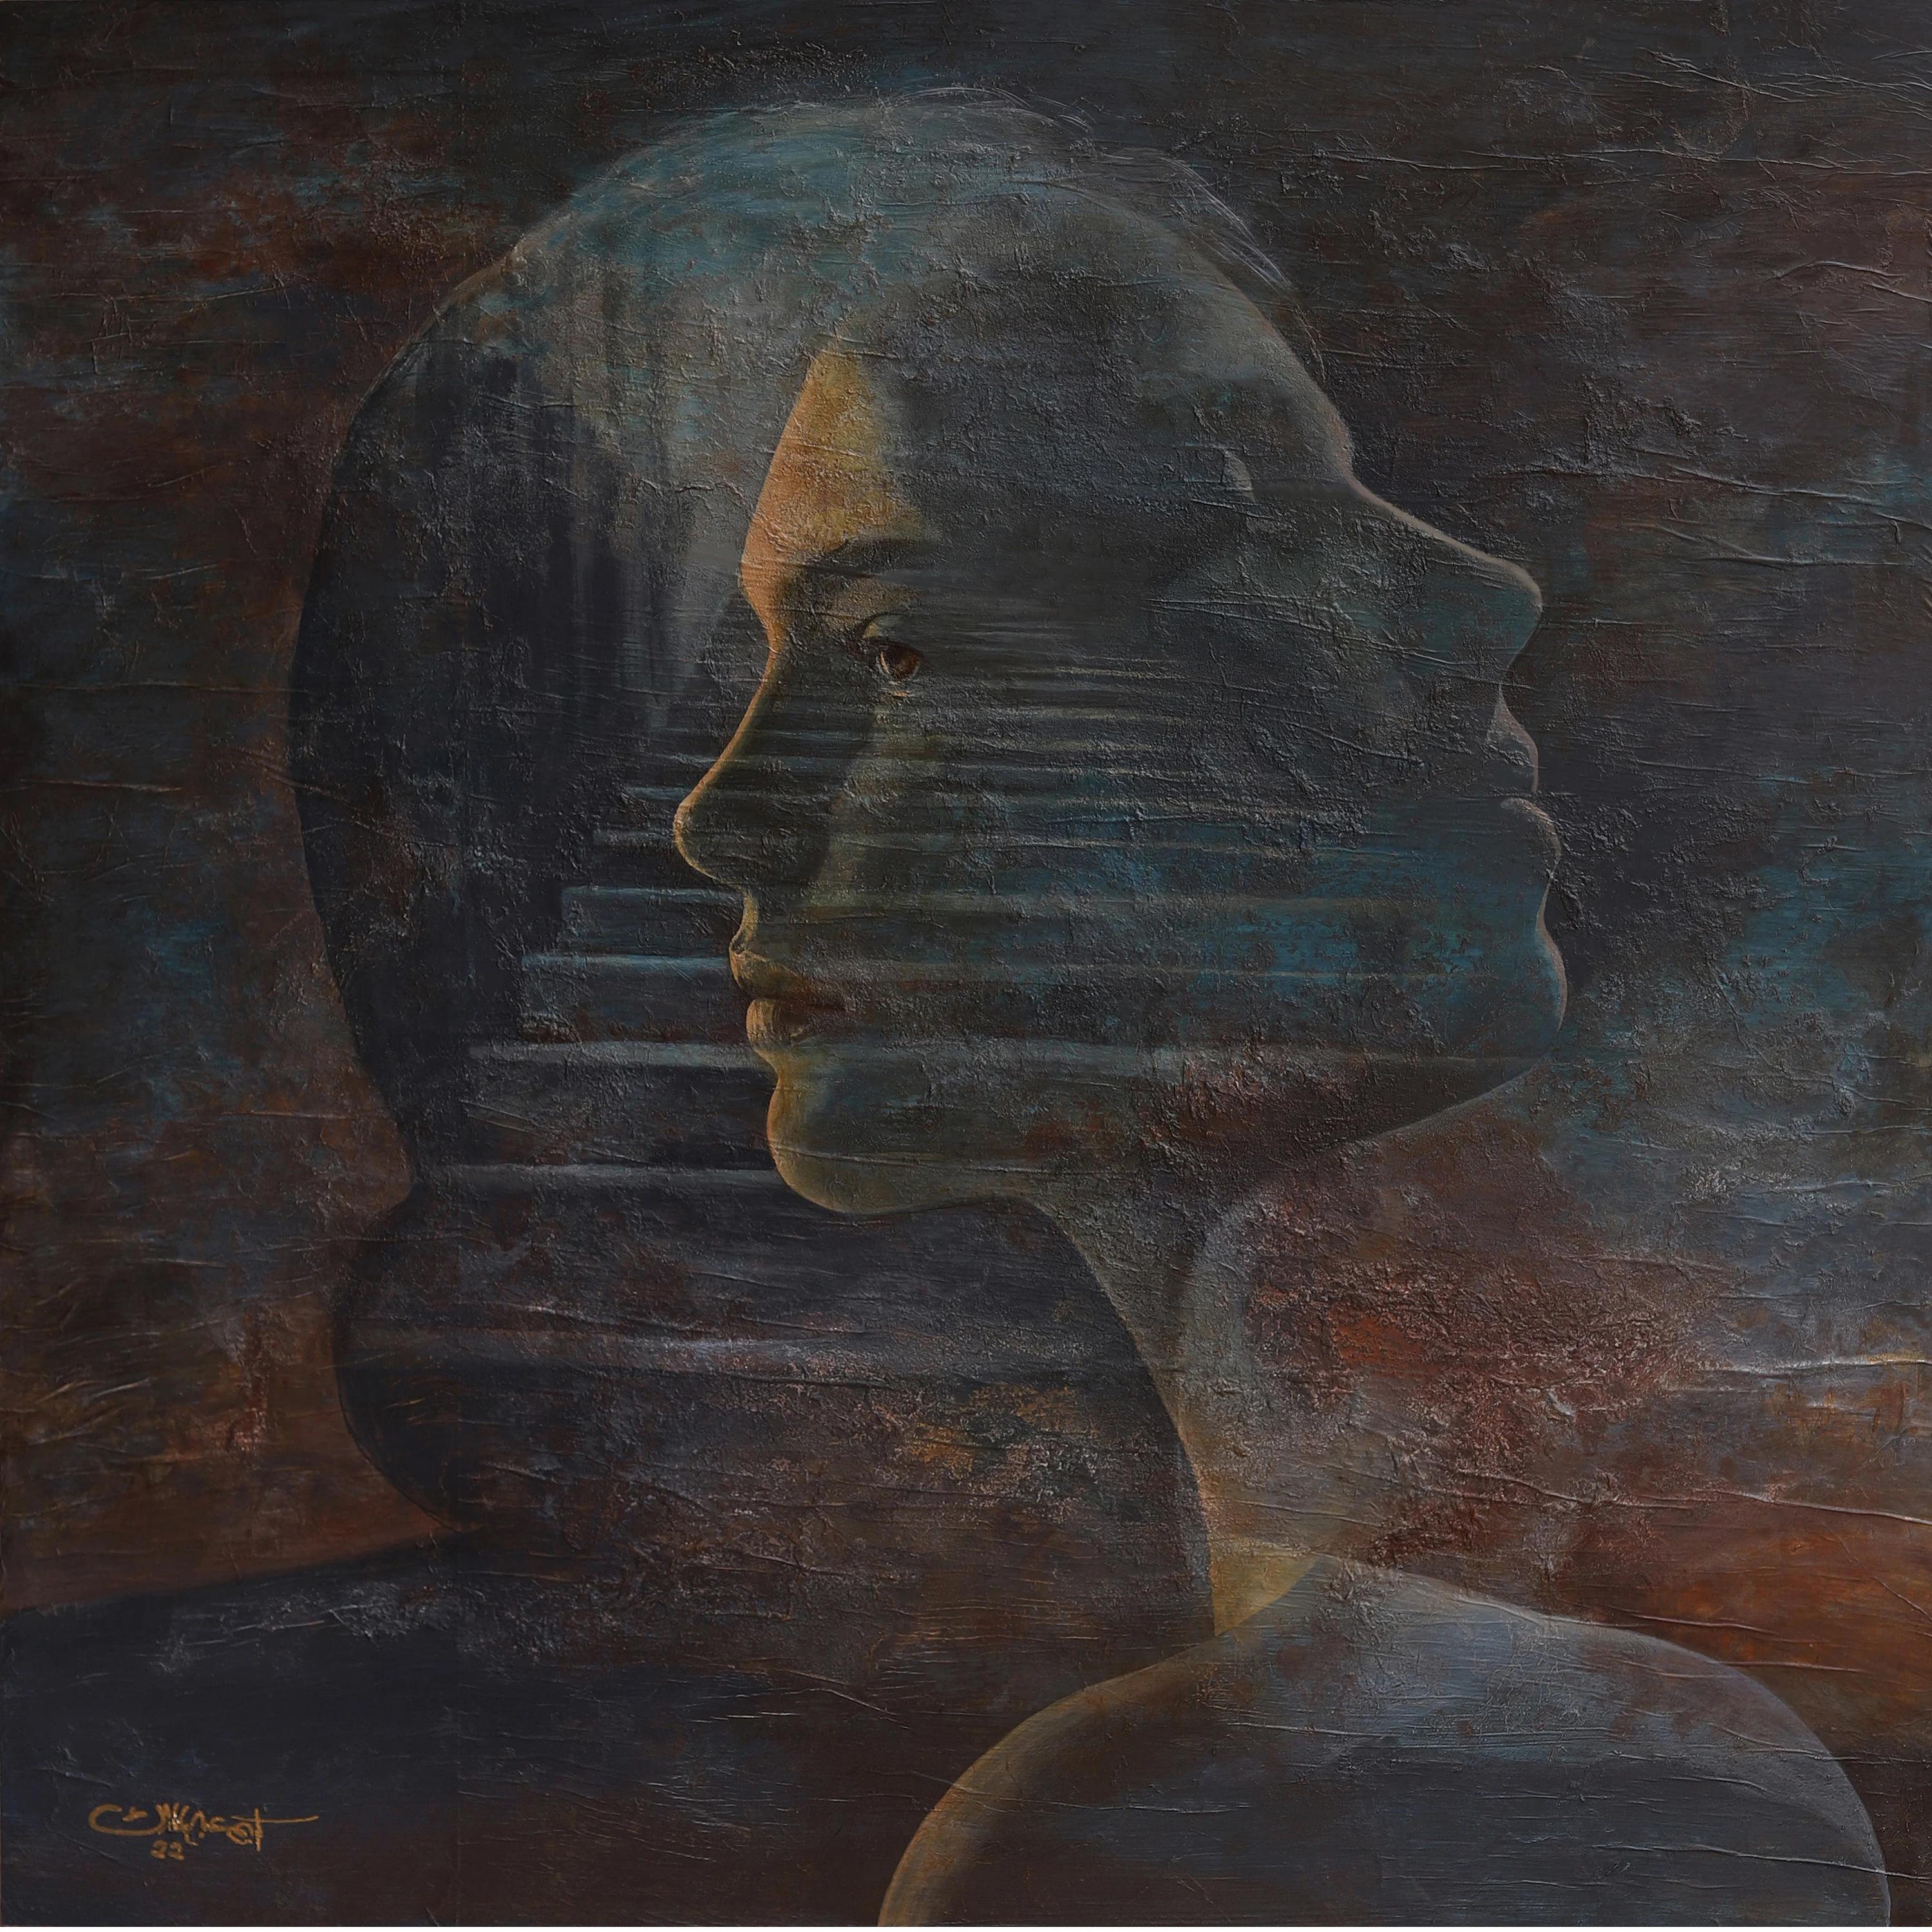 "Flight of Stares" Painting 39" x 39" inch by Karim Abd Elmalak

Karim Abdel Malak's layered multi-media works are influenced by the old masters. 
Abdel Malak textured oils are a celebration of the female identity in every sense of the word. His